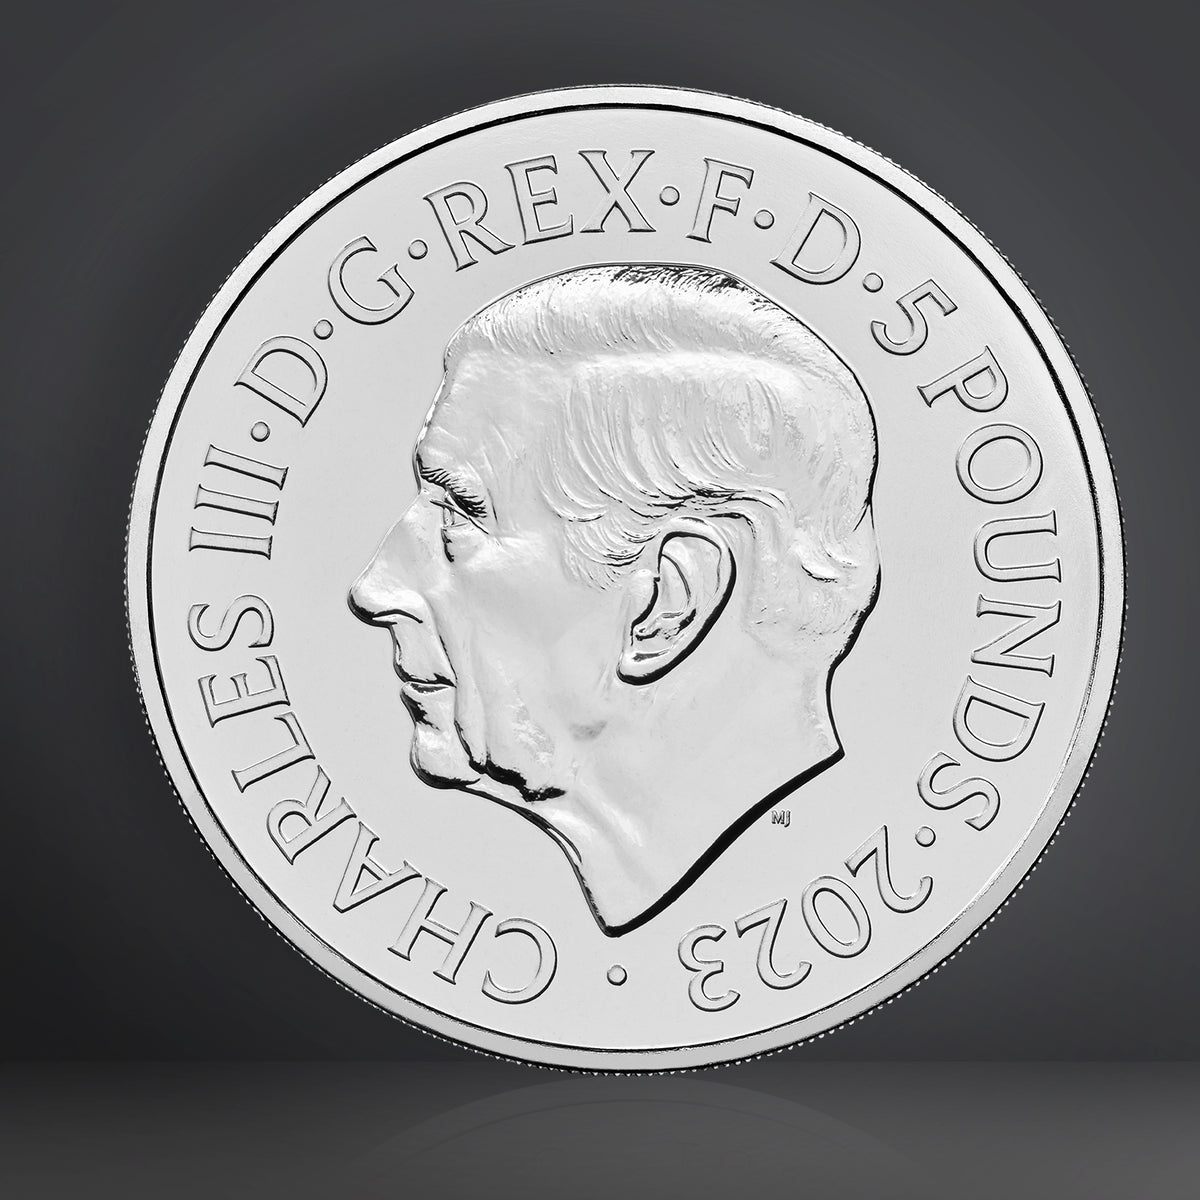 James Bond £5 Crown Brilliant Uncirculated Coin - 1960s Edition - by The Royal Mint